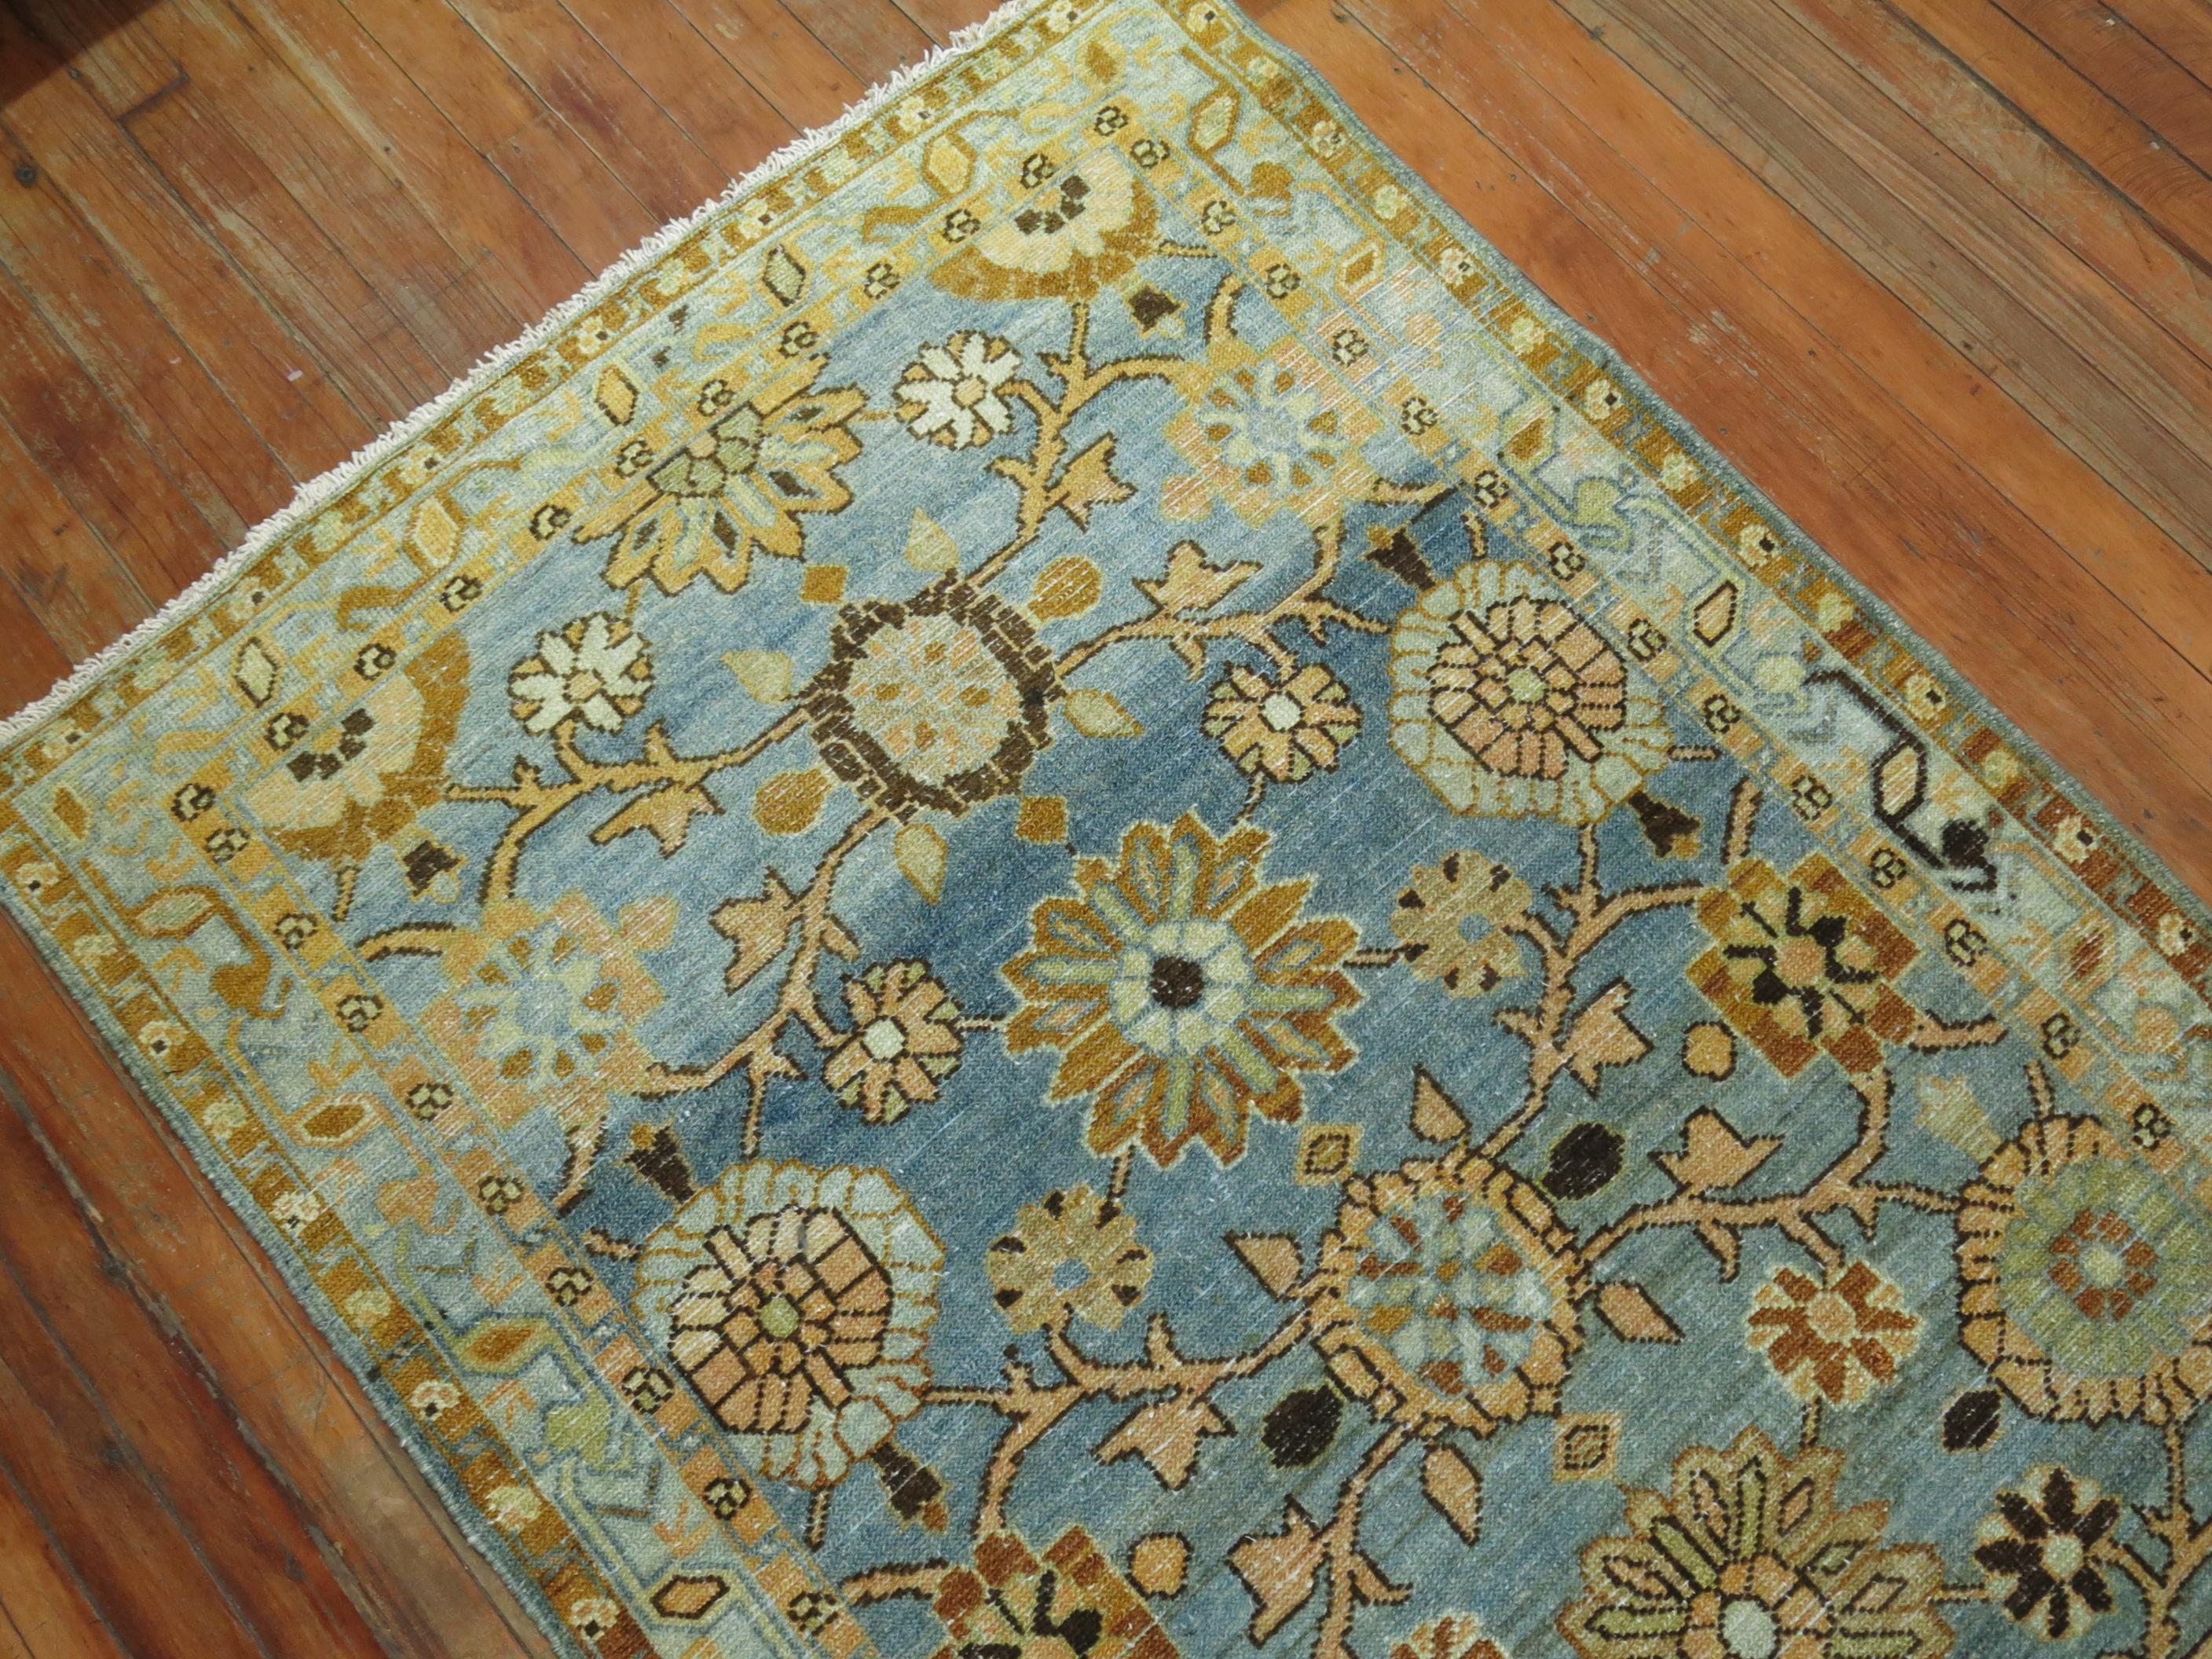 An antique malayer runner with a mini khani pattern on an sky blue/aqua blue background from the early 20th century

Size: 3'2